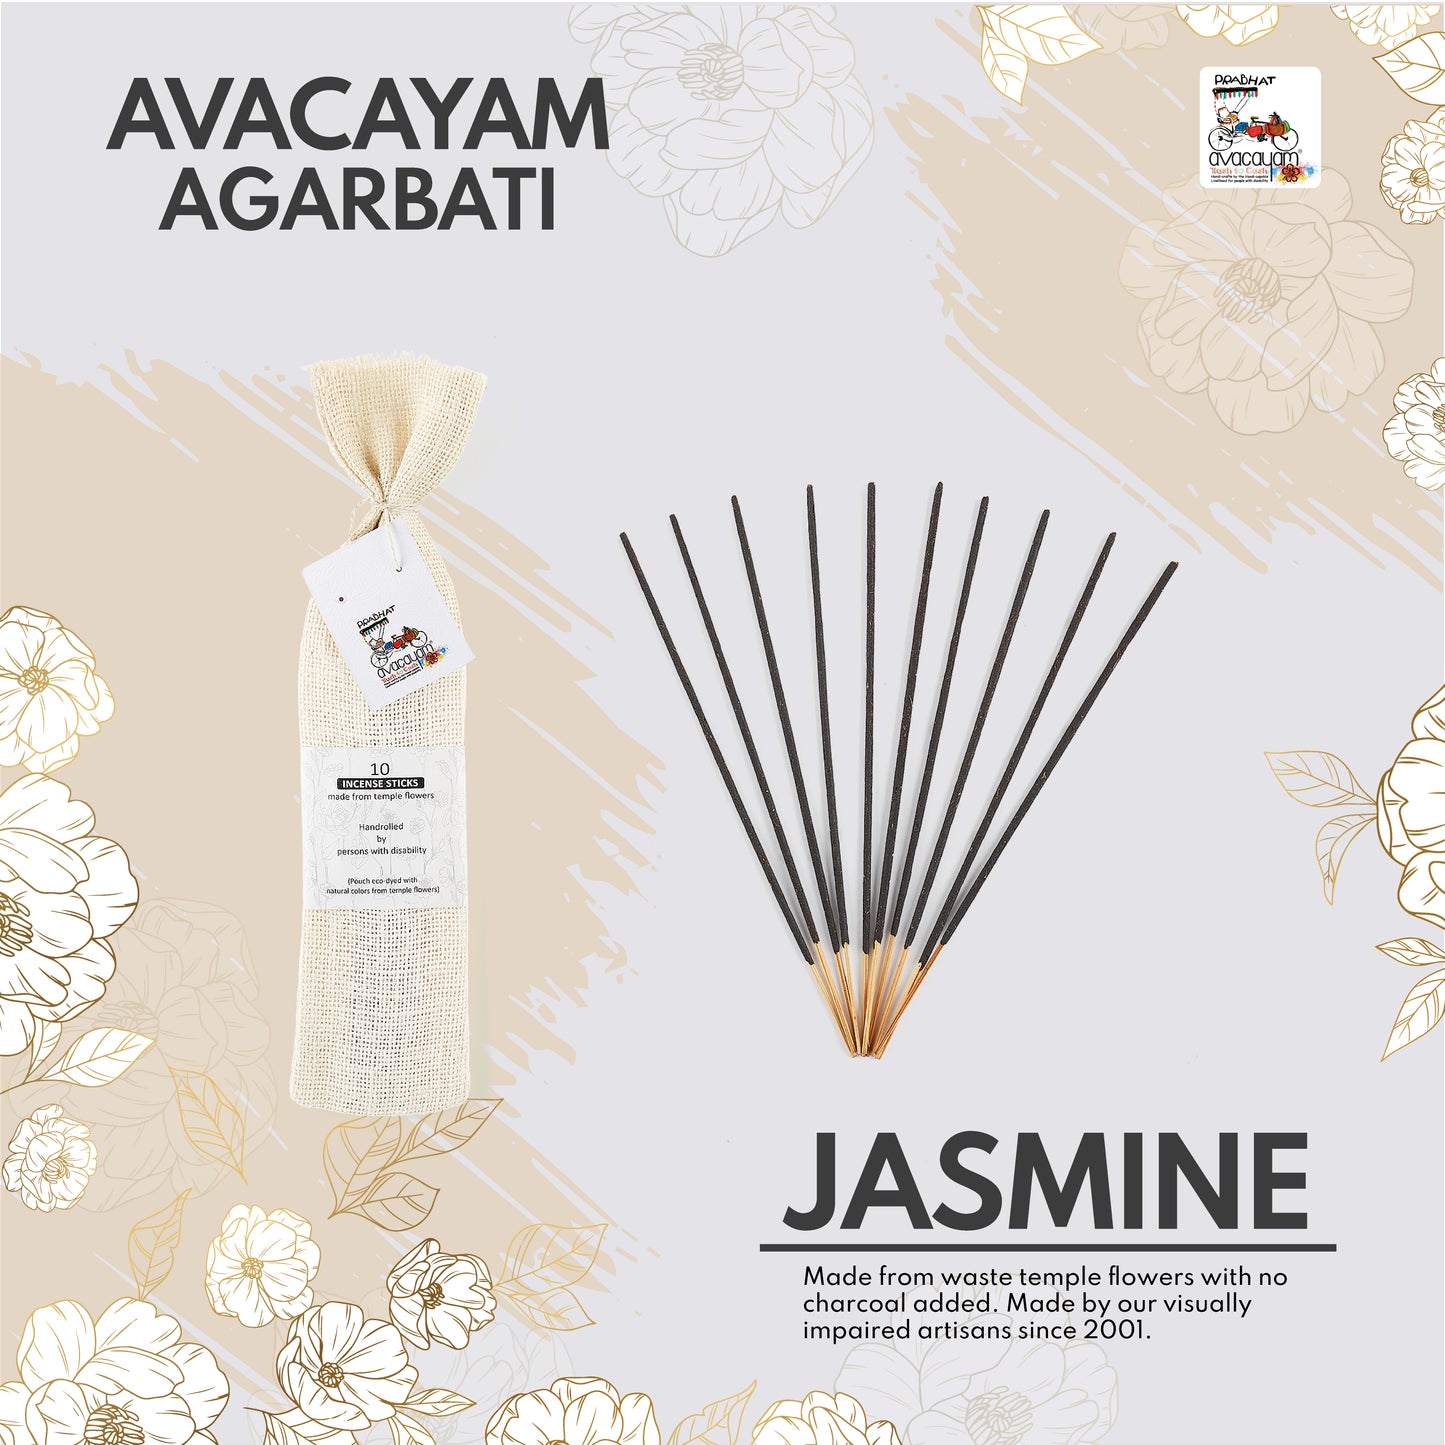 25 Jasmine Fragrance Agarbati, All Natural Agarbati made from Temple Flowers - 100% Charcoal Free